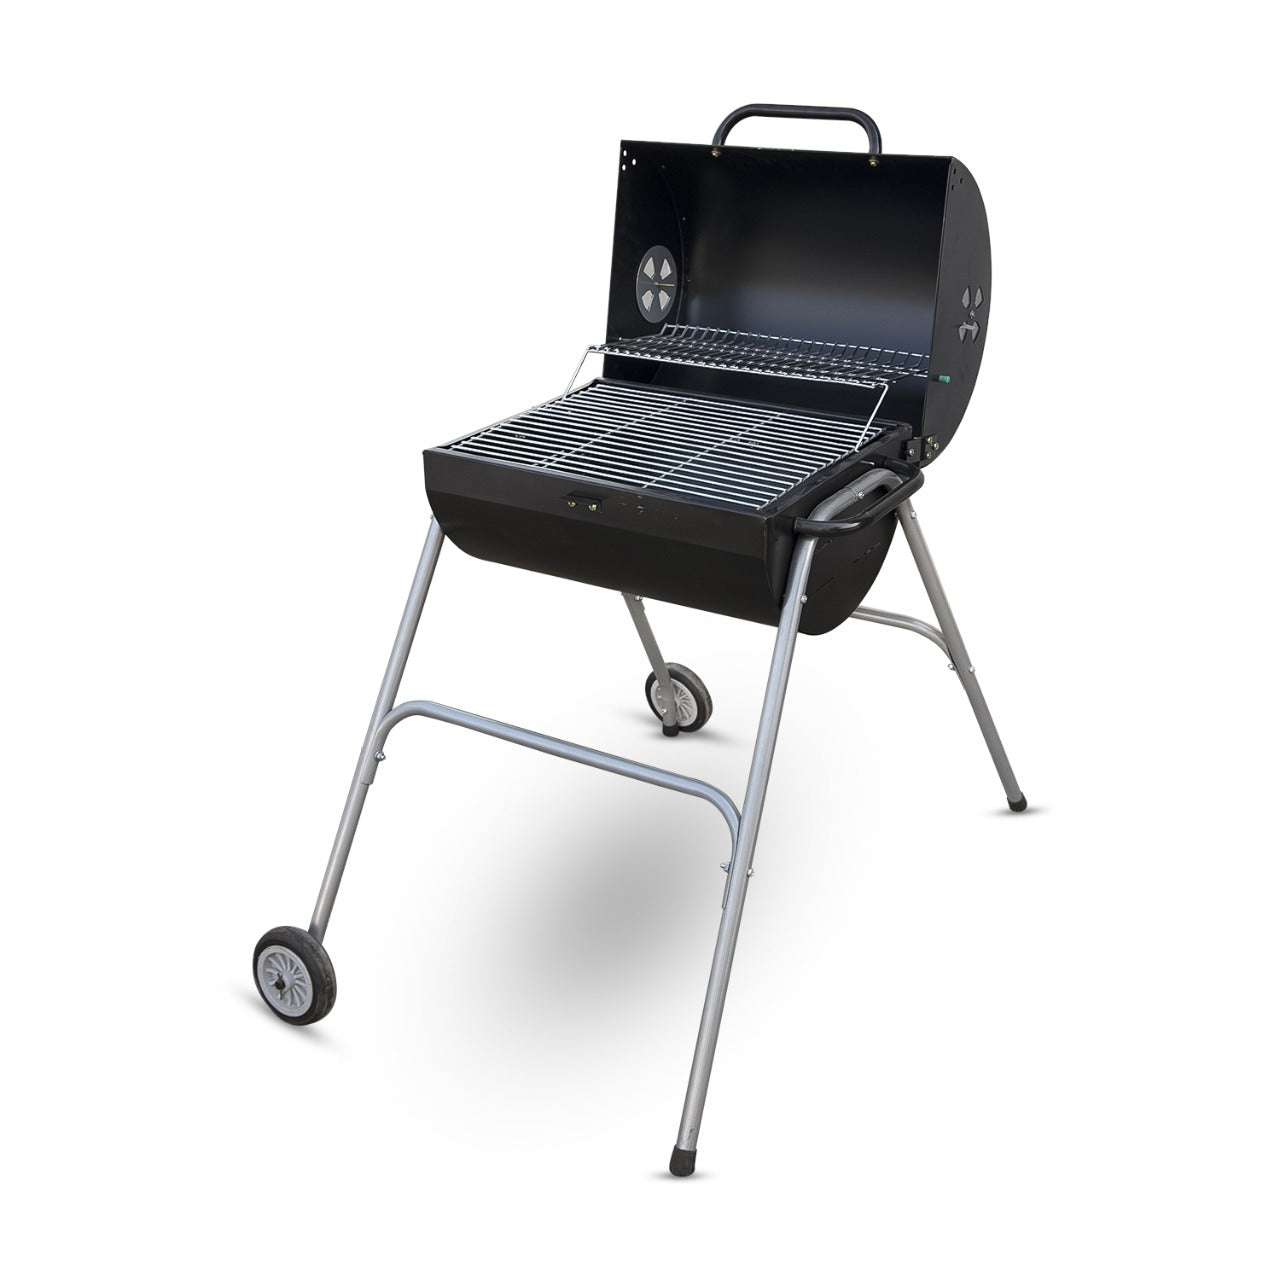 Charcoal Compact Barbecue with Grill Kit